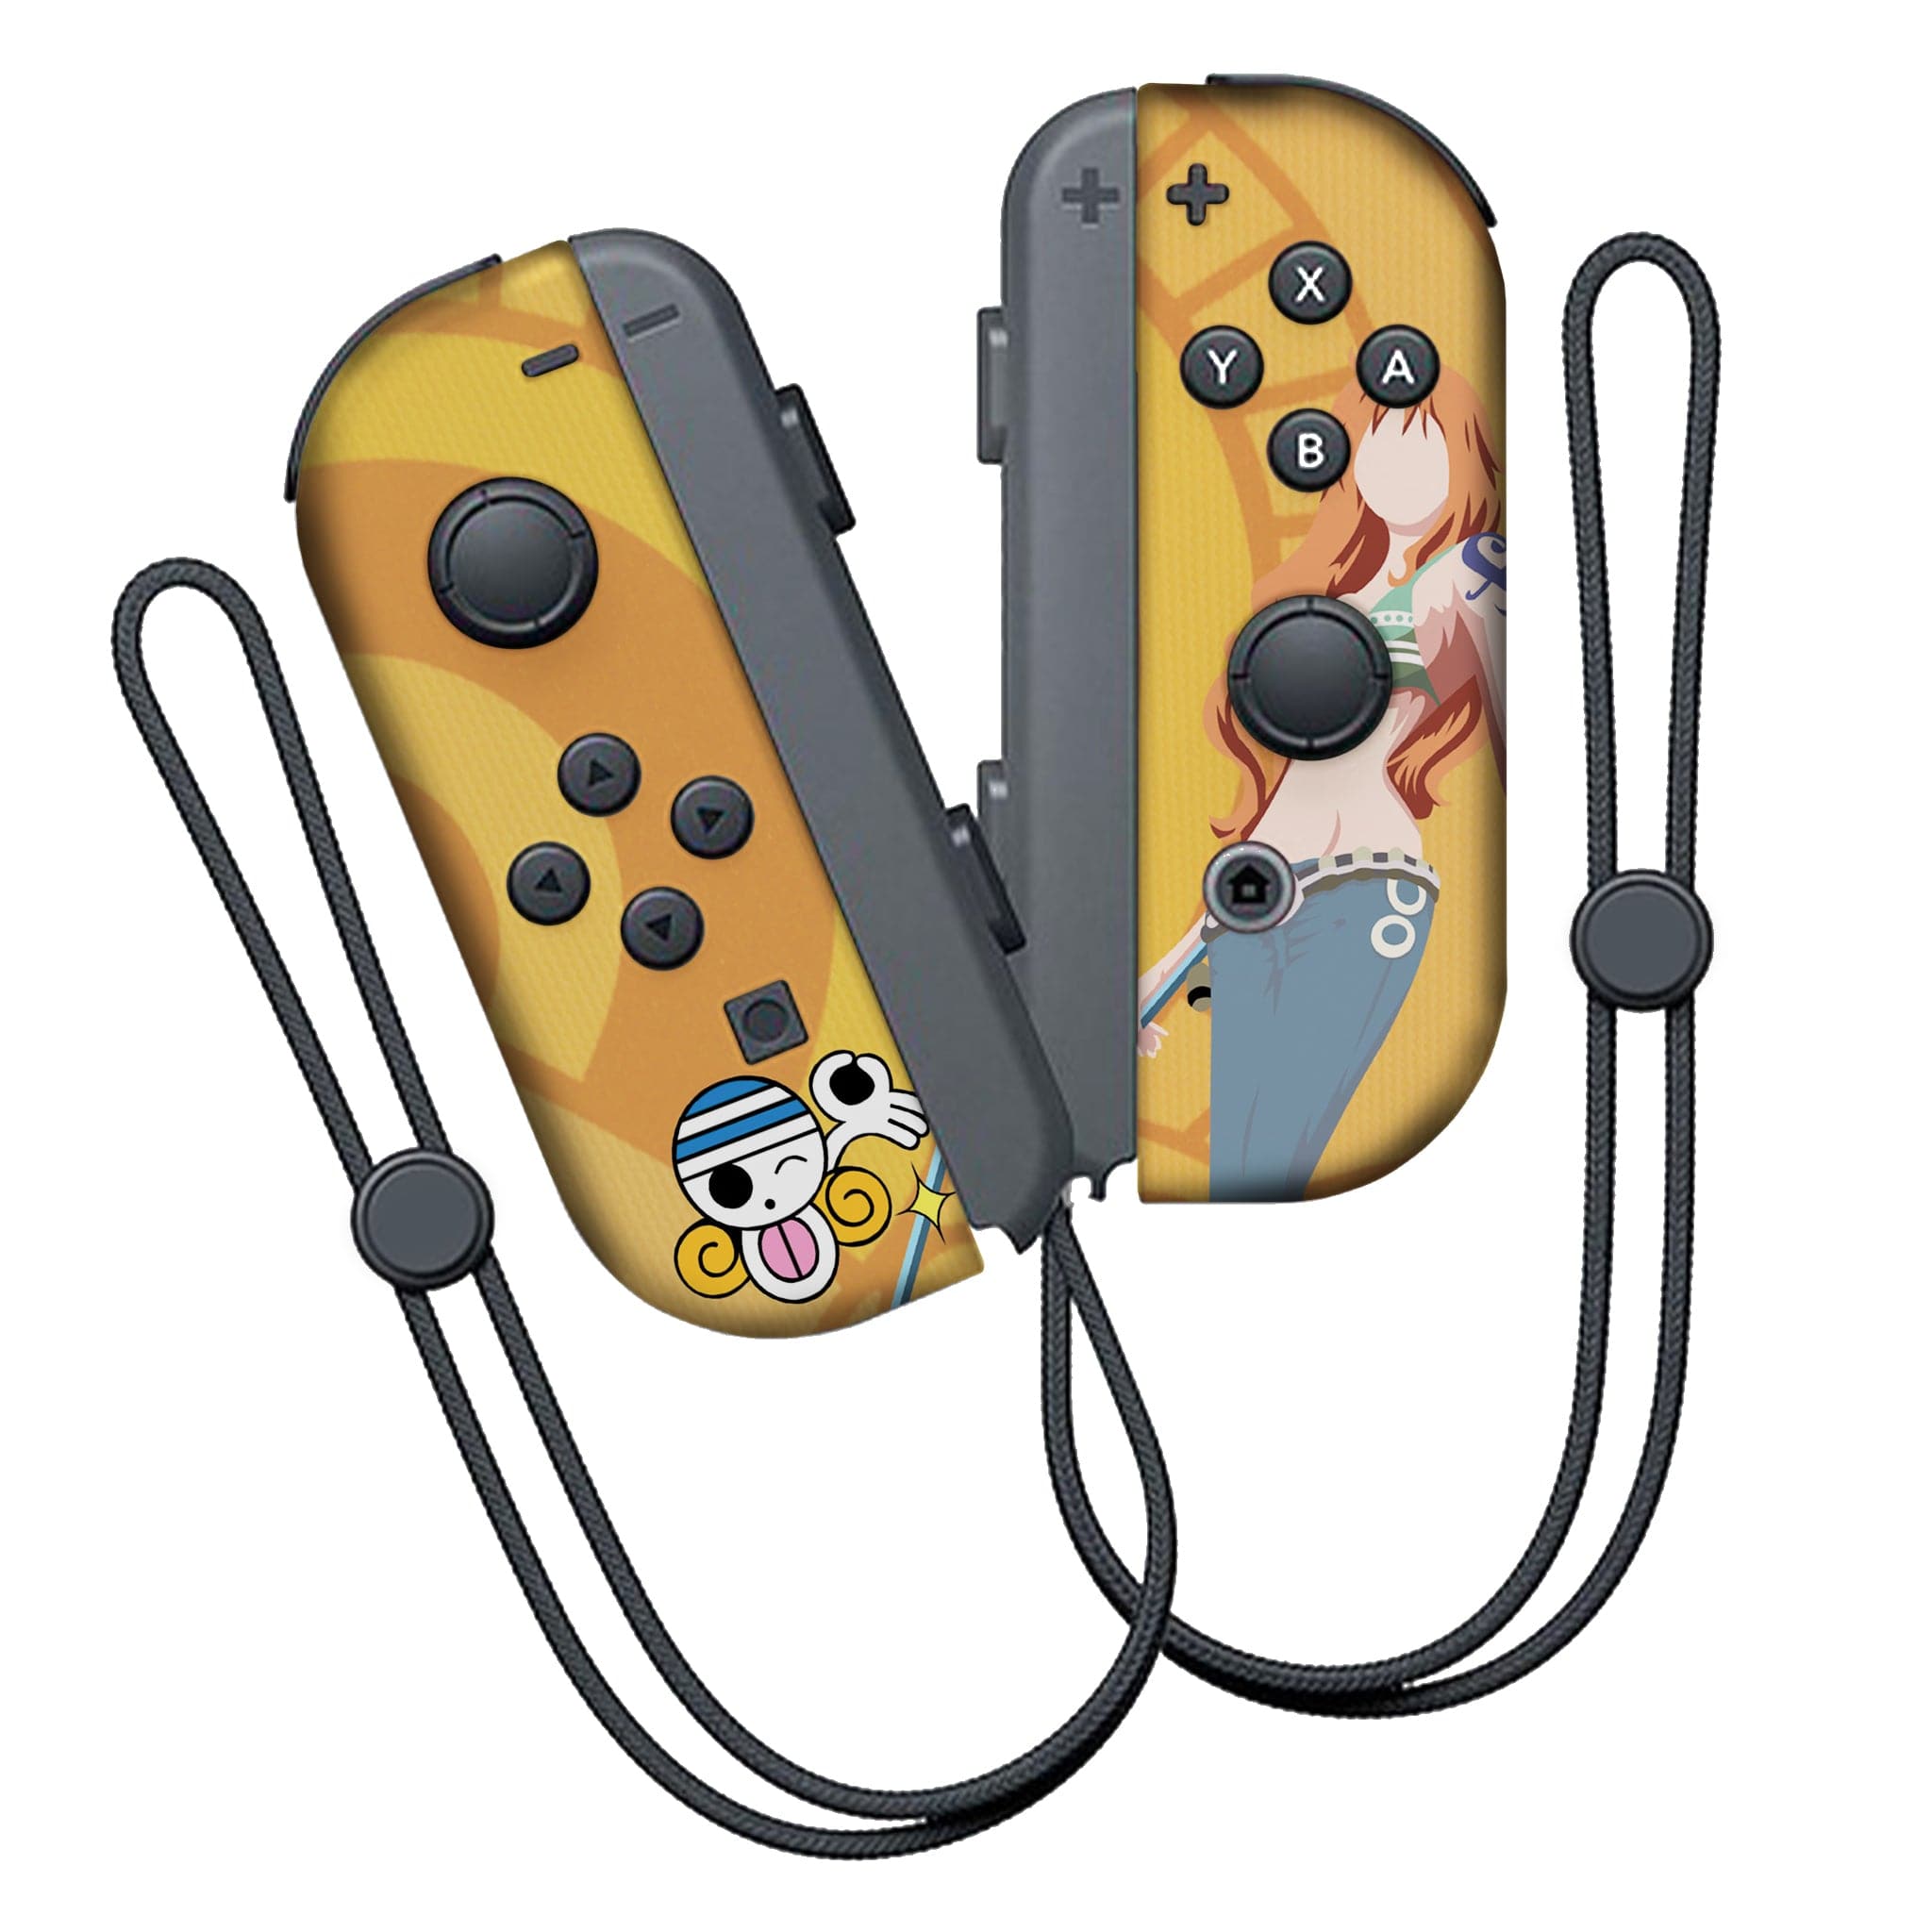 Nami One Piece Inspired Nintendo Switch Joy-Con Left and Right Switch Controllers by Nintendo